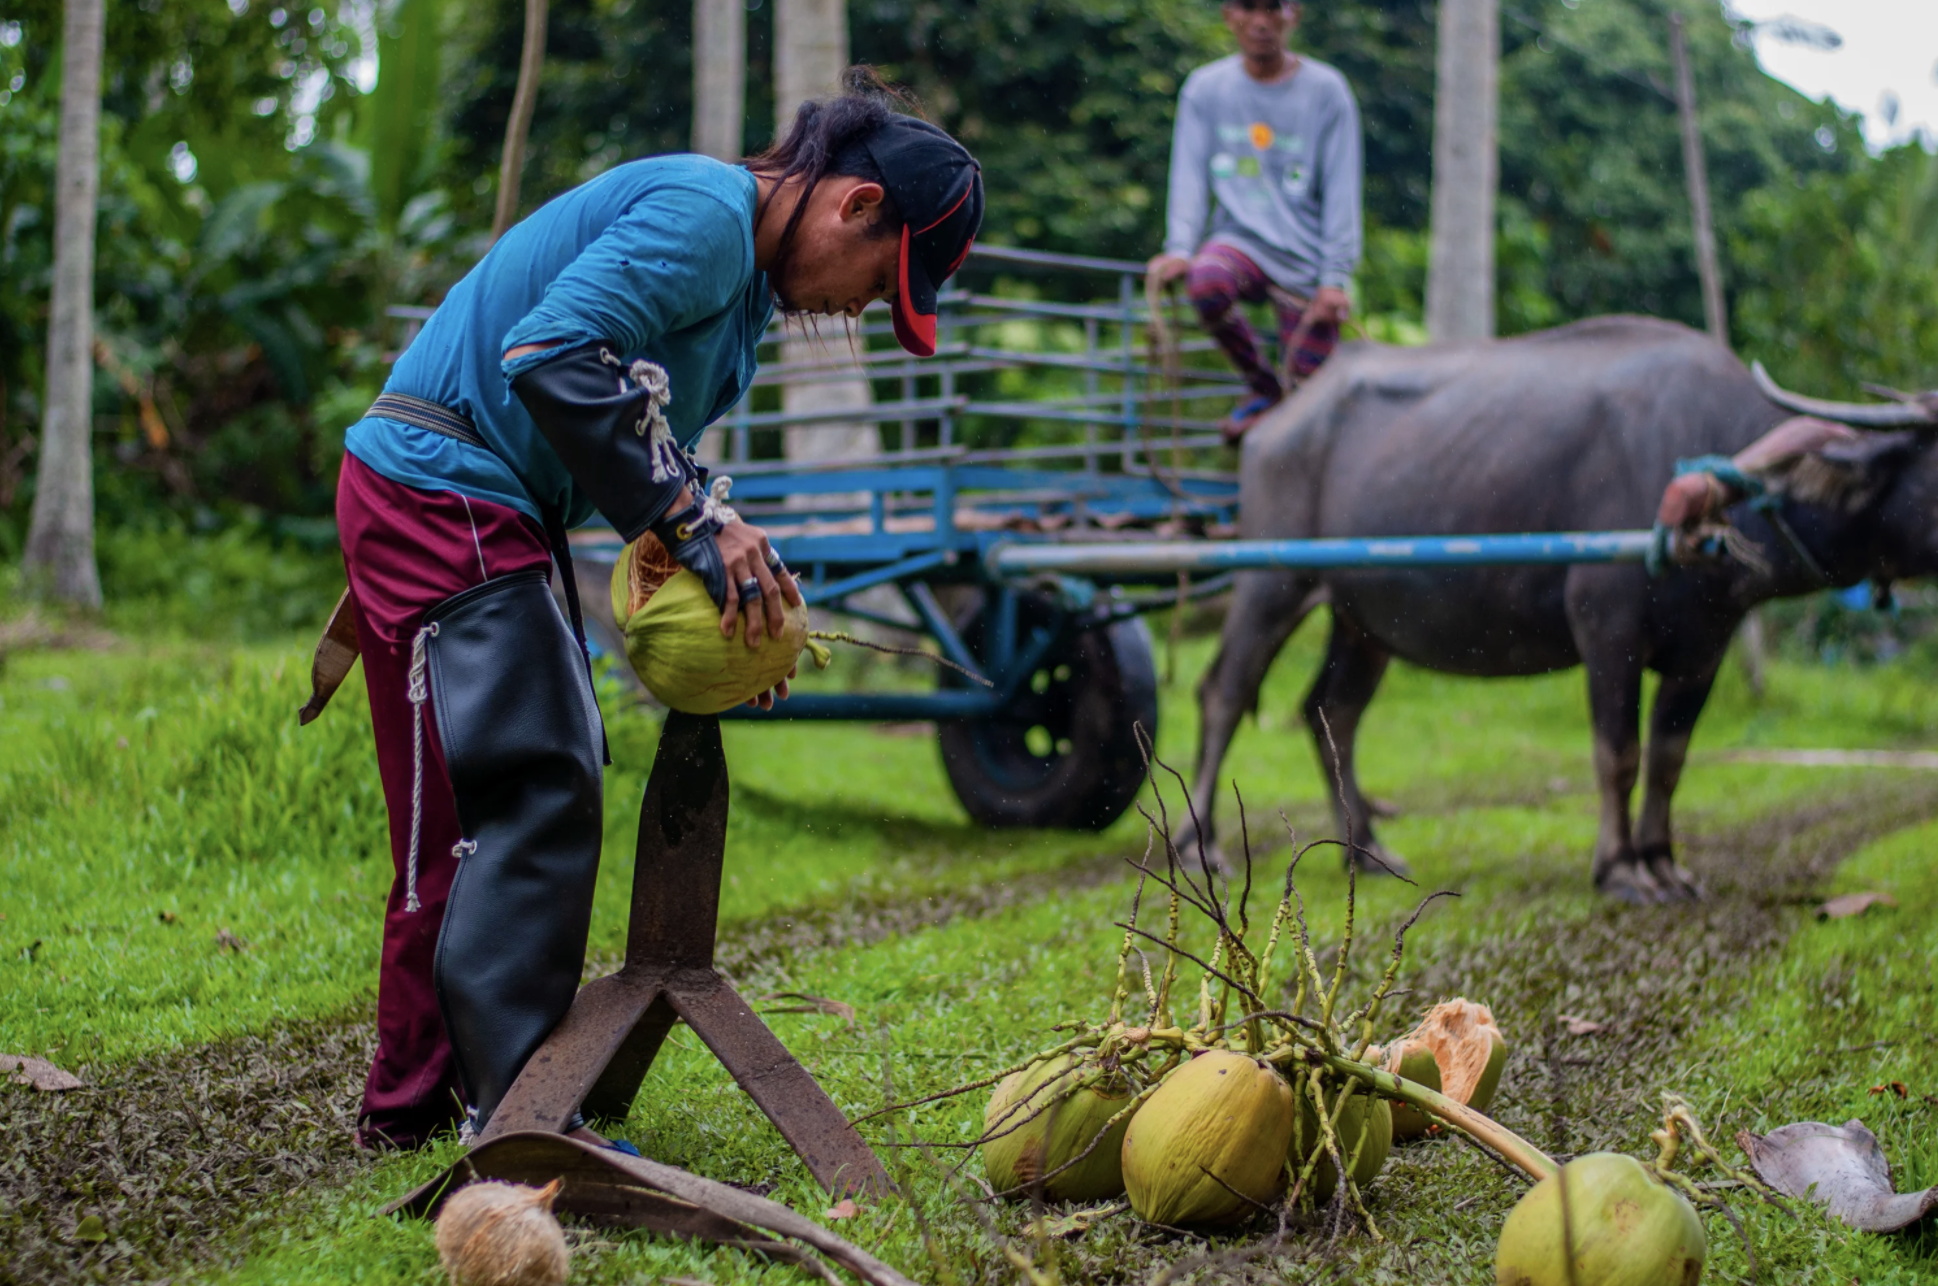 Workers gathering organic, fair-trade coconuts at Anabelle Tan Reynoso's farm in Saraiya, Philippines. Image by Jervis Gonzales. Philippines, undated.